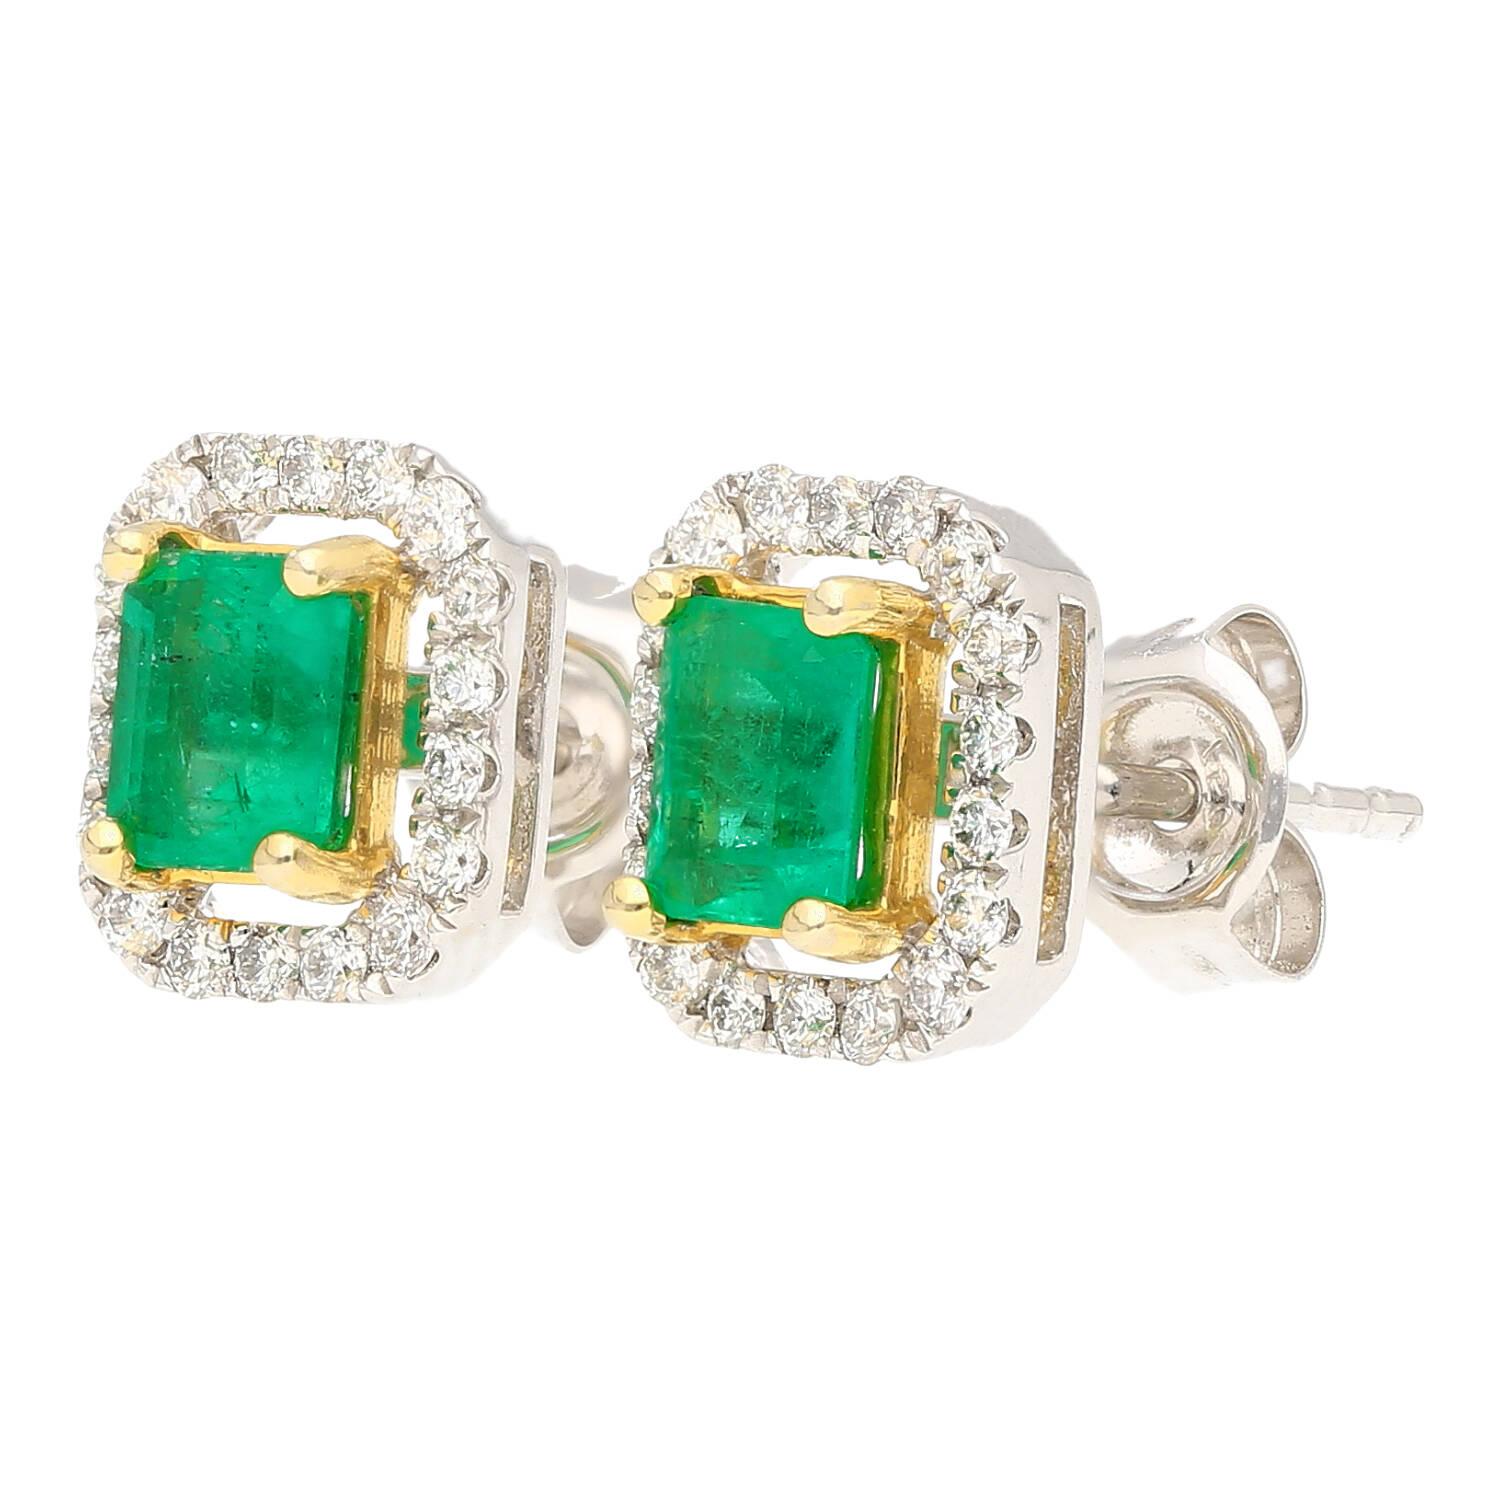 Emerald Cut Classic 1 Carat Natural Emerald and Diamond Halo Stud Earrings in 18k White Gold For Sale